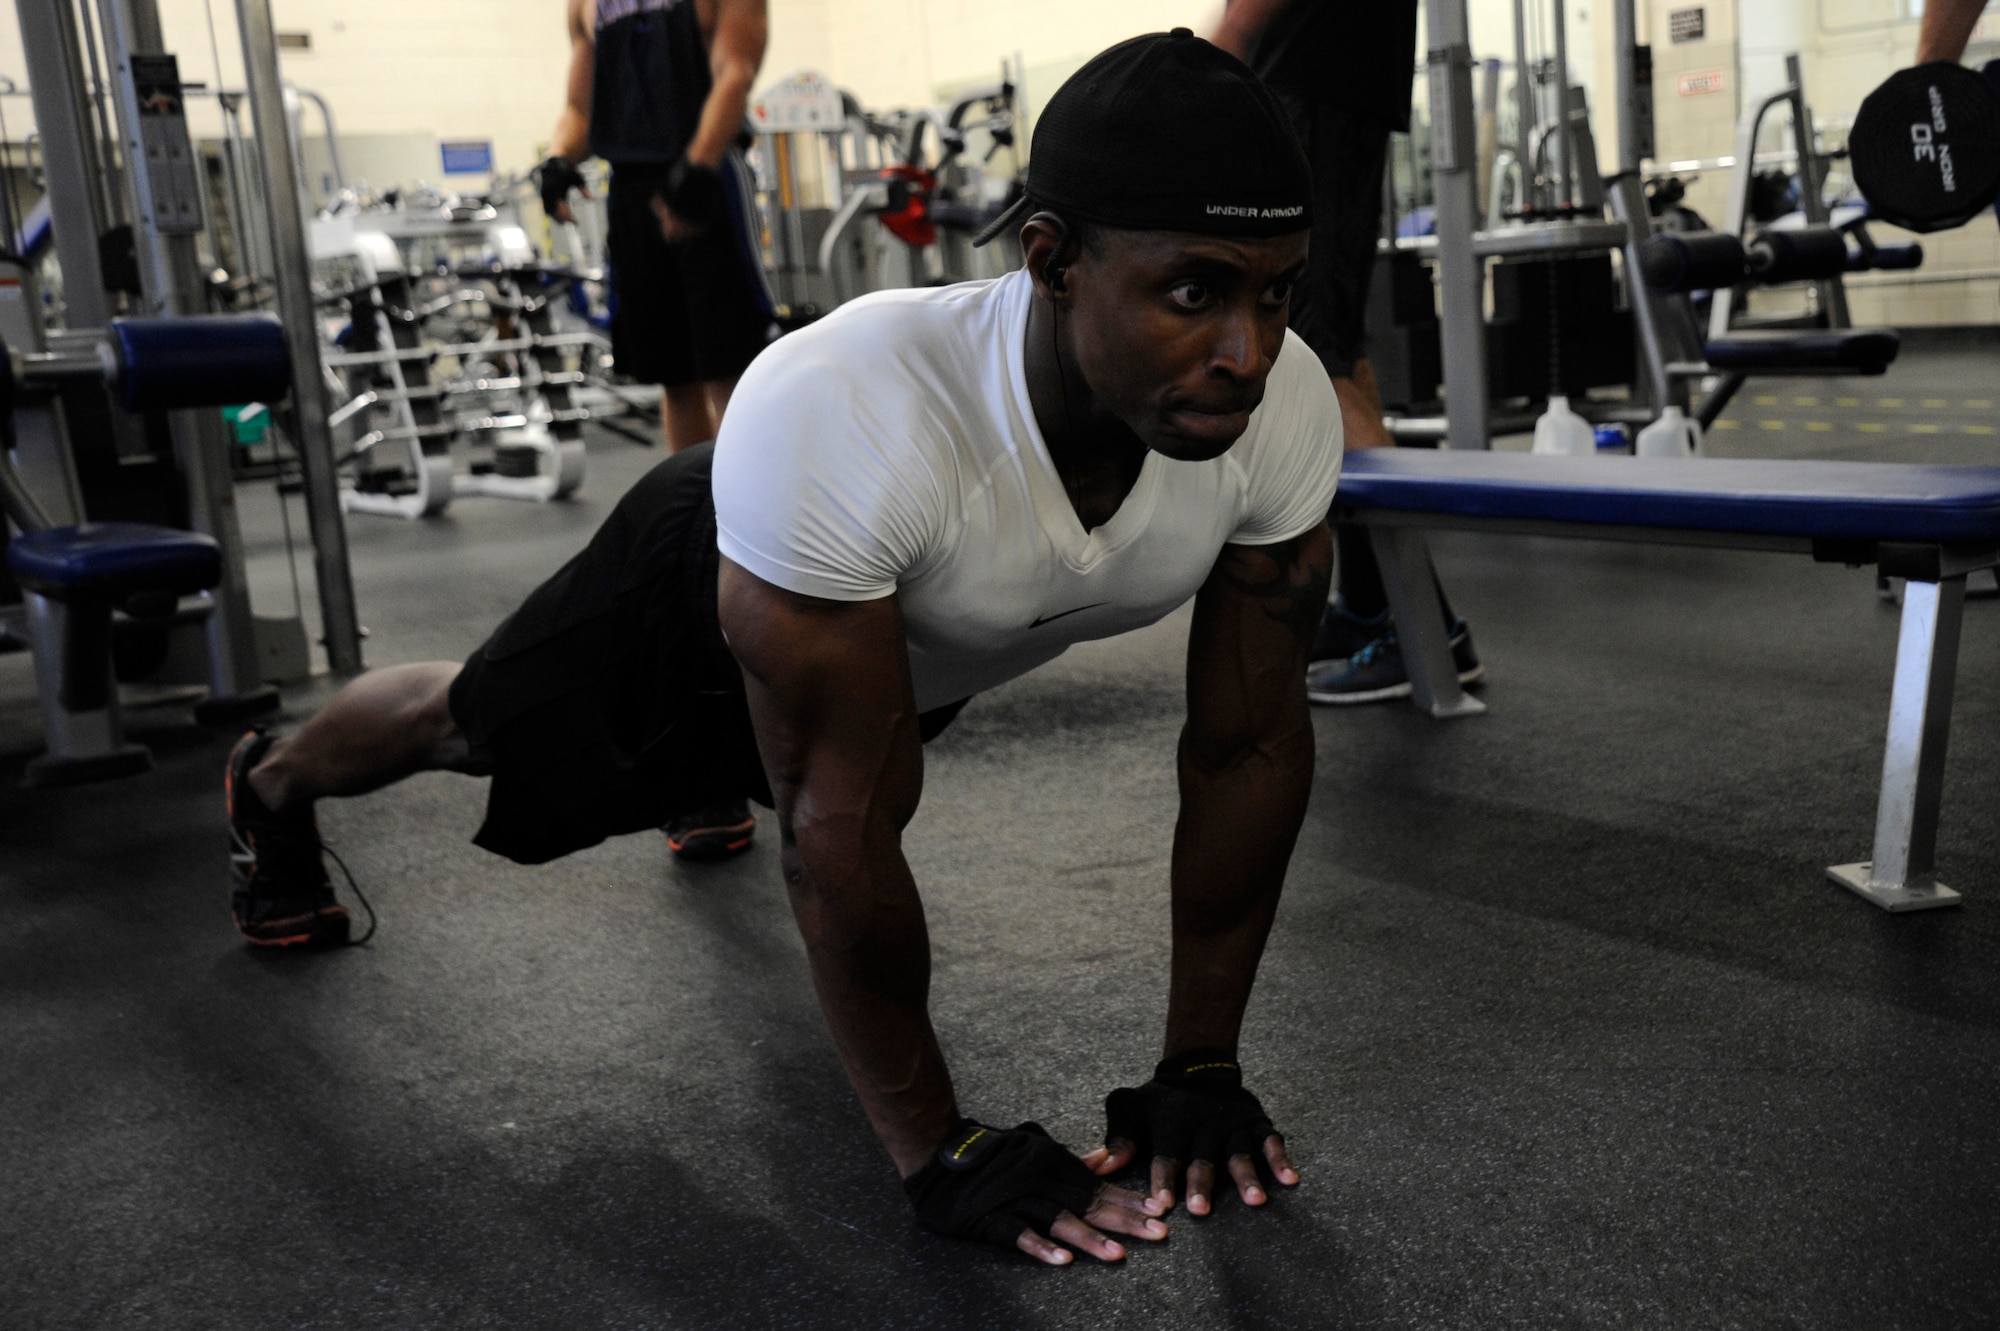 Staff Sgt. Chris Moore, 30th Comptroller Squadron customer support NCO, performs a diamond push-up, July 20, 2015, Vandenberg Air Force Base, Calif. In addition to managing his Airmen, his duties as a Physical Training Leader and maintaining a grueling workout schedule, Moore currently is a men’s physique competitor under the National Physique Committee, the largest amateur bodybuilding organization in the U.S. (U.S. Air Force photo by Airman 1st Class Robert J. Volio/Released)